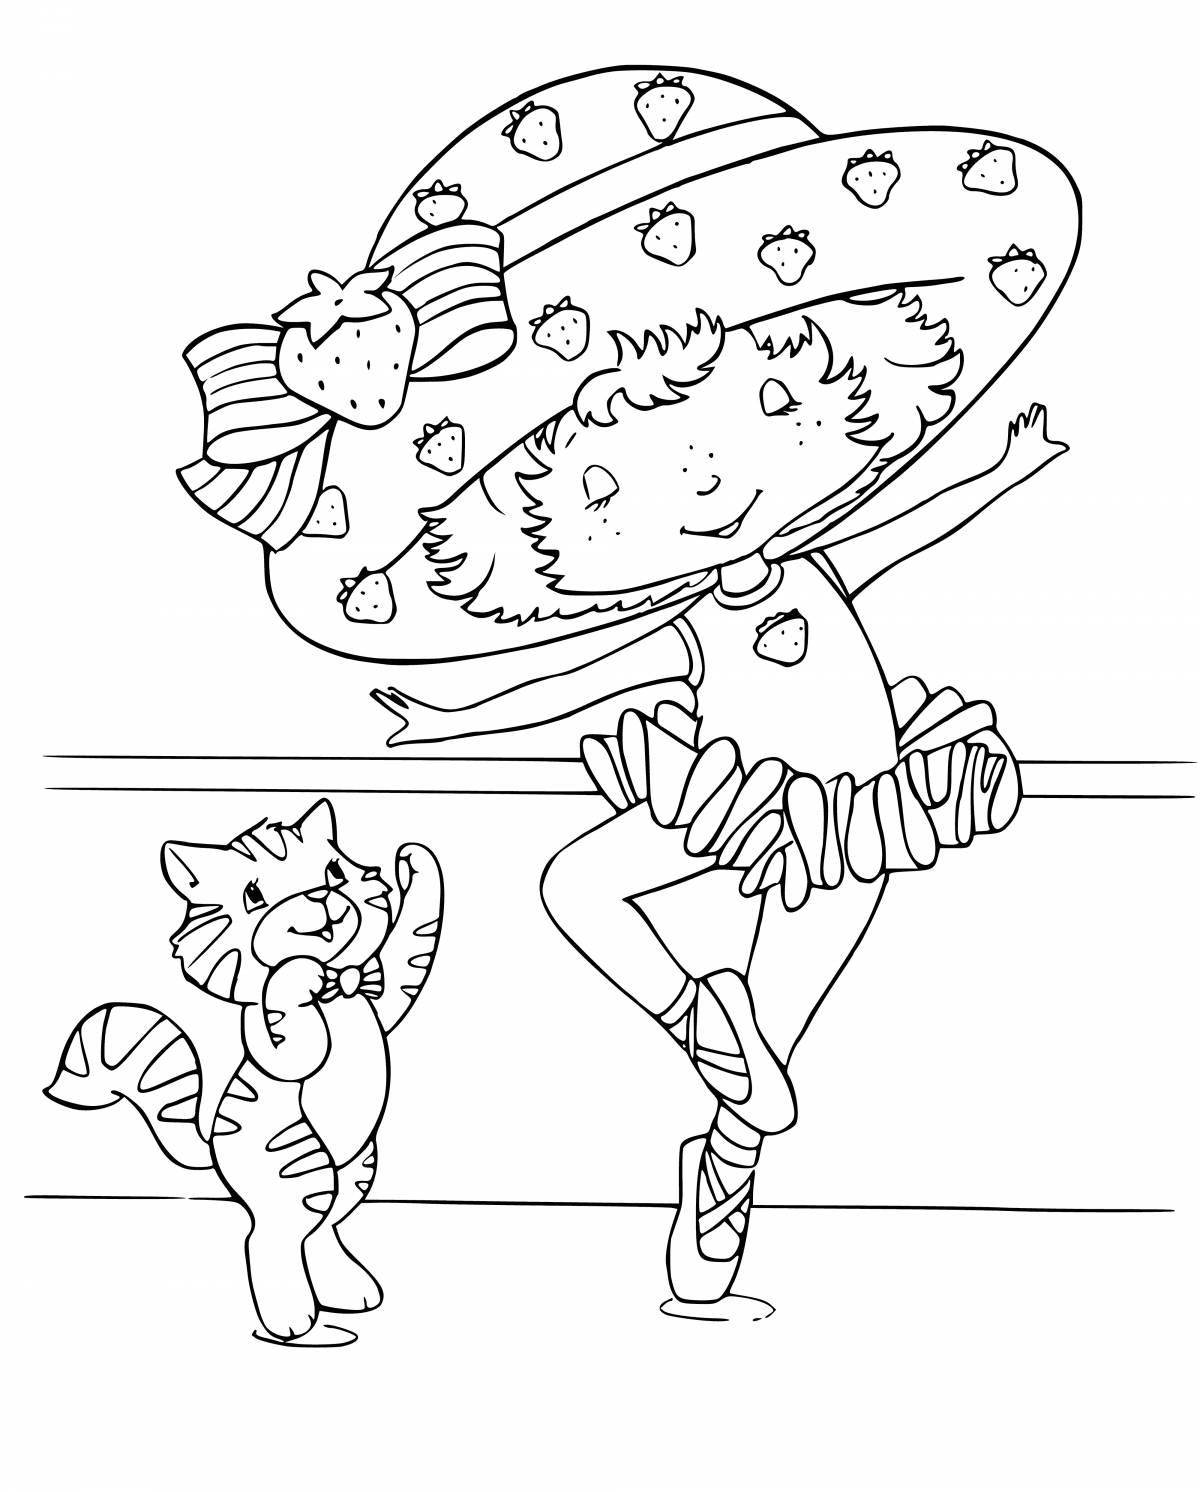 Coloring page bright ballerina cat